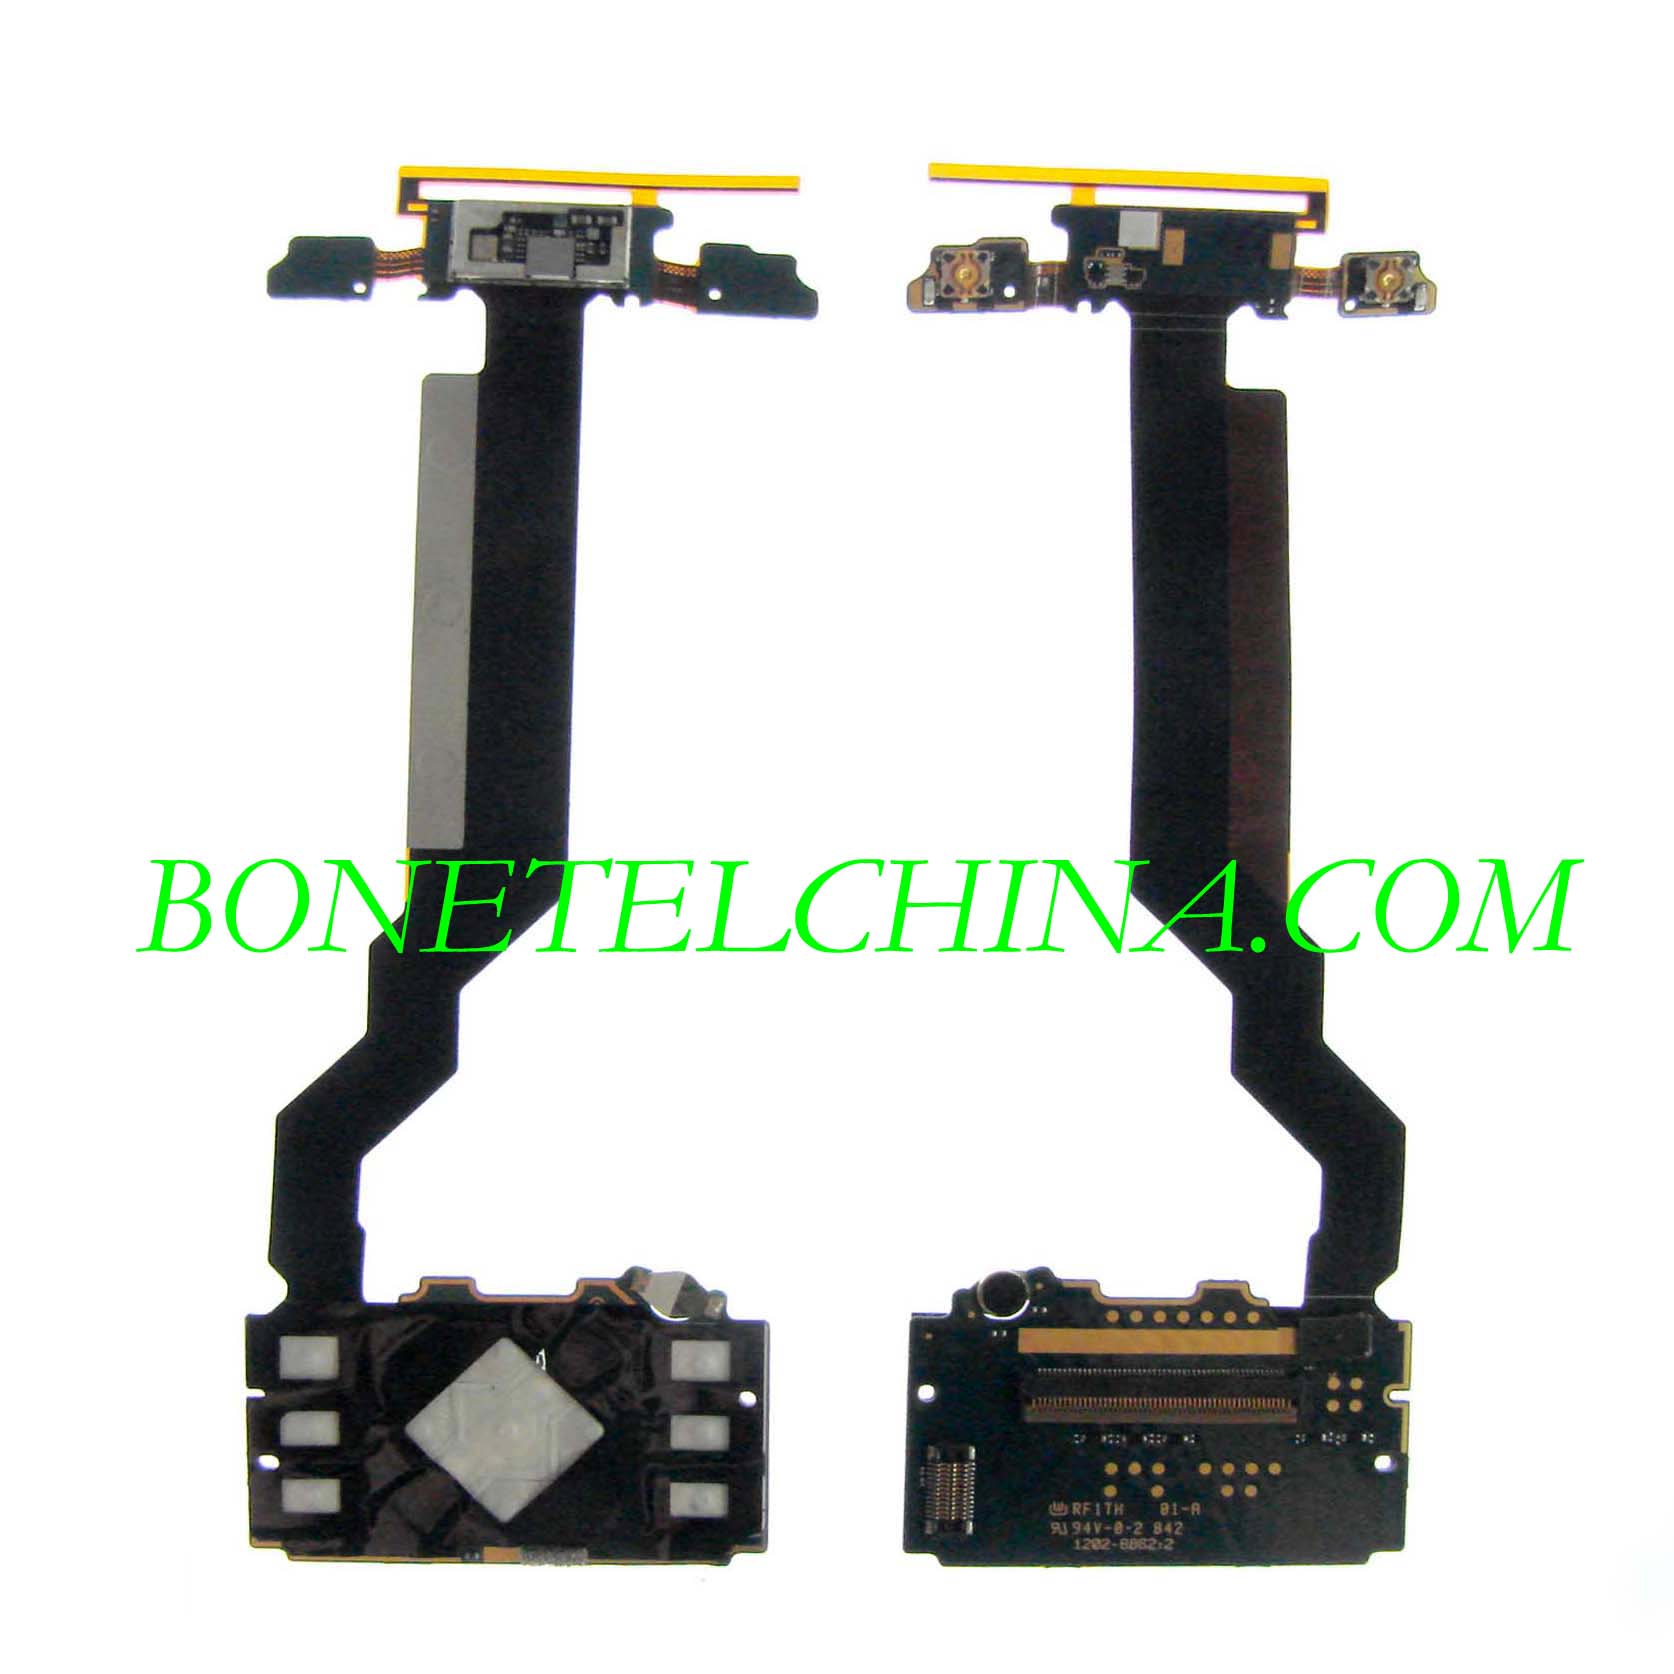 C905 main board Mobile phone Flex Cables for Sony Ericsson